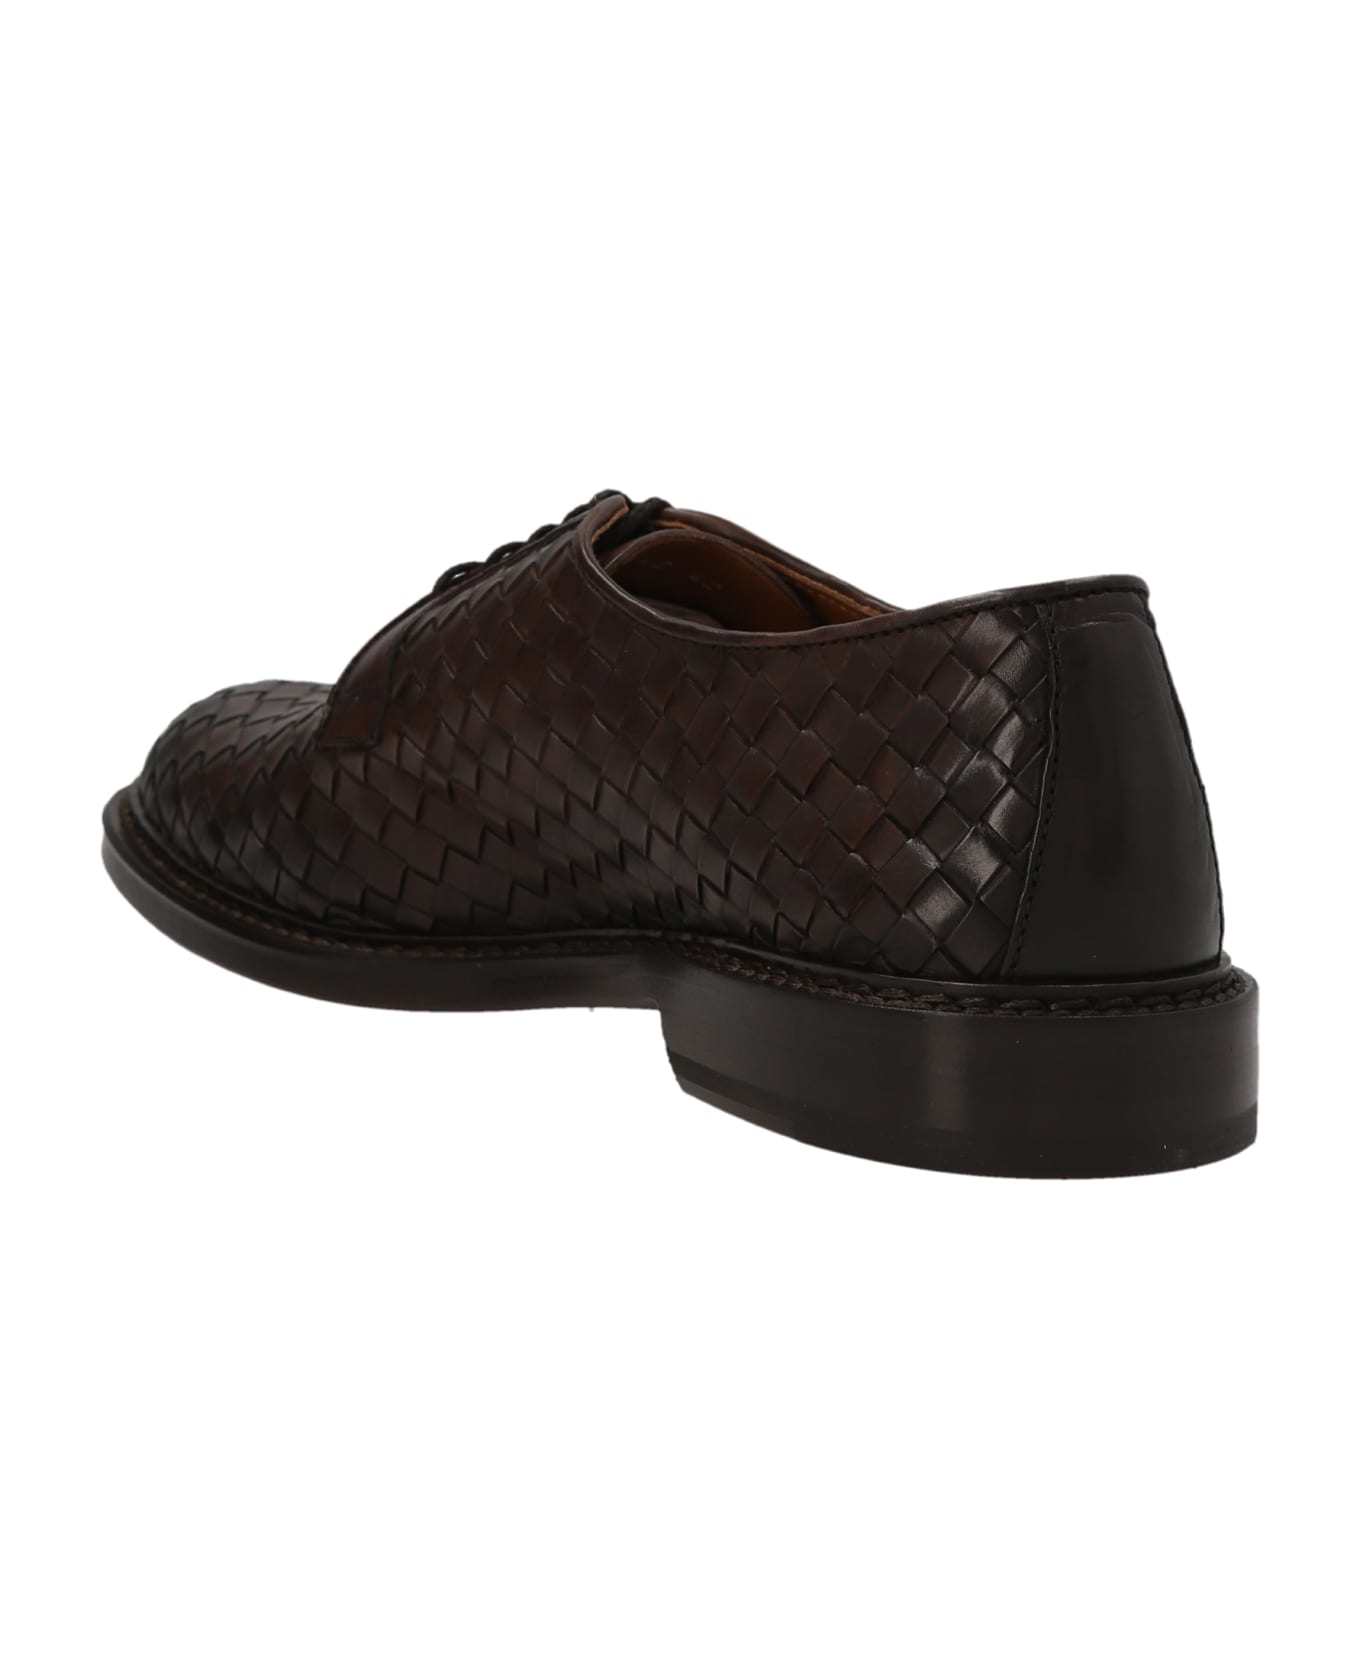 Doucal's Woven Leather Derby Shoes Men - Brown